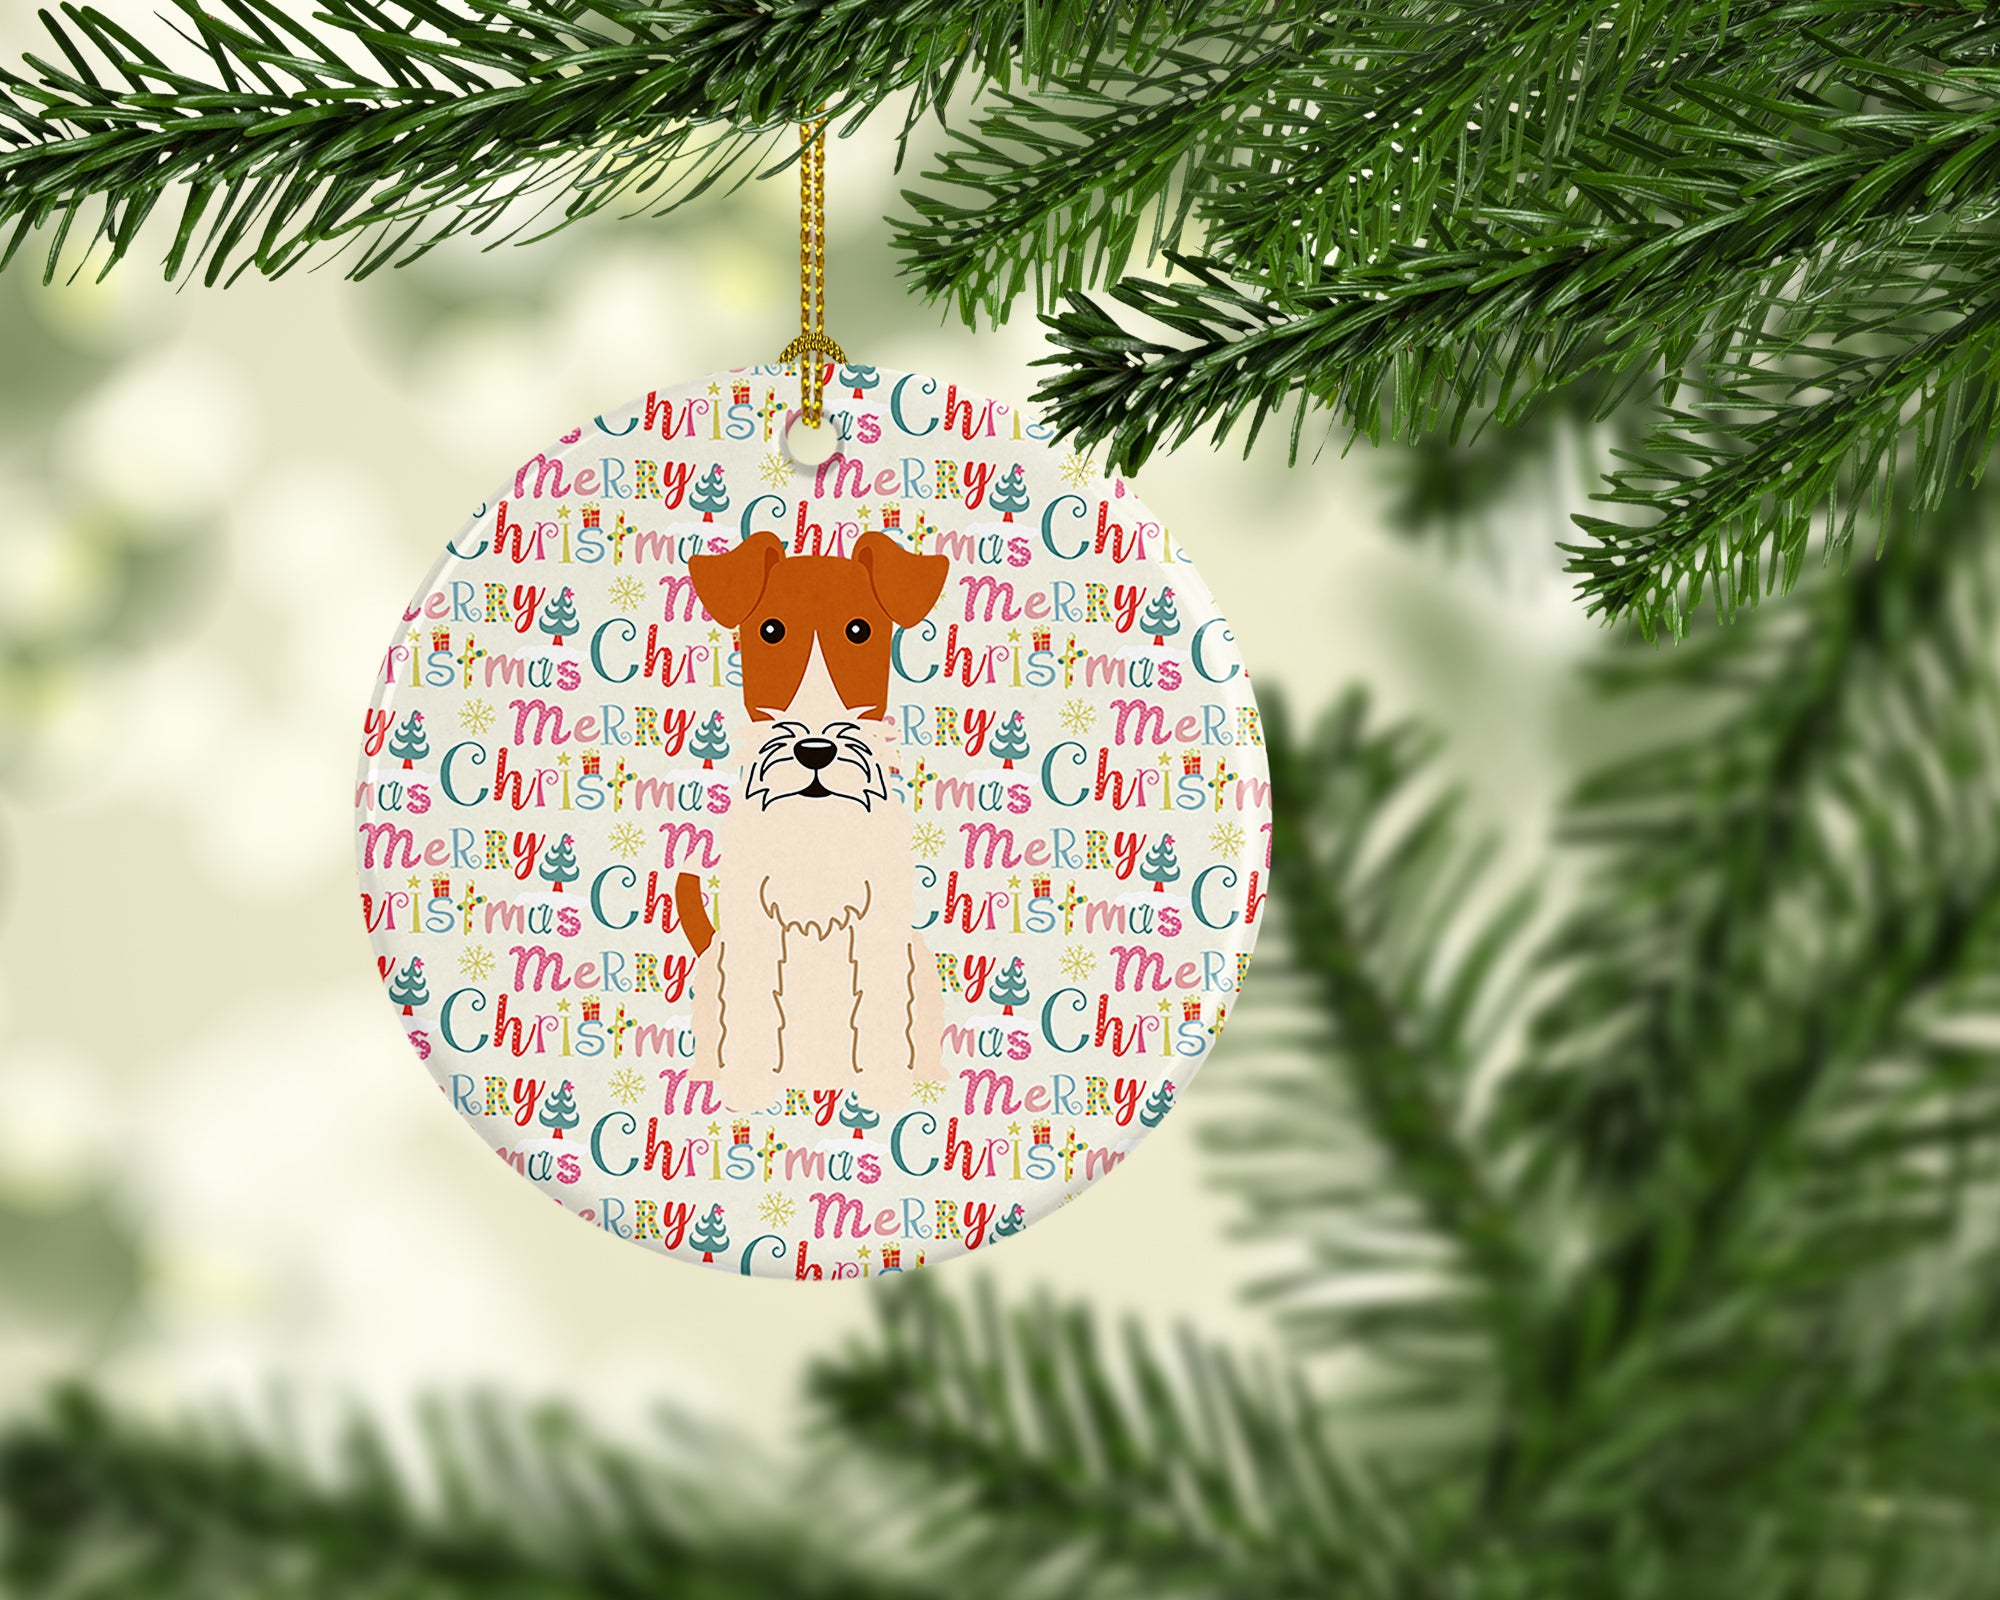 Buy this Merry Christmas Wire Fox Terrier Ceramic Ornament